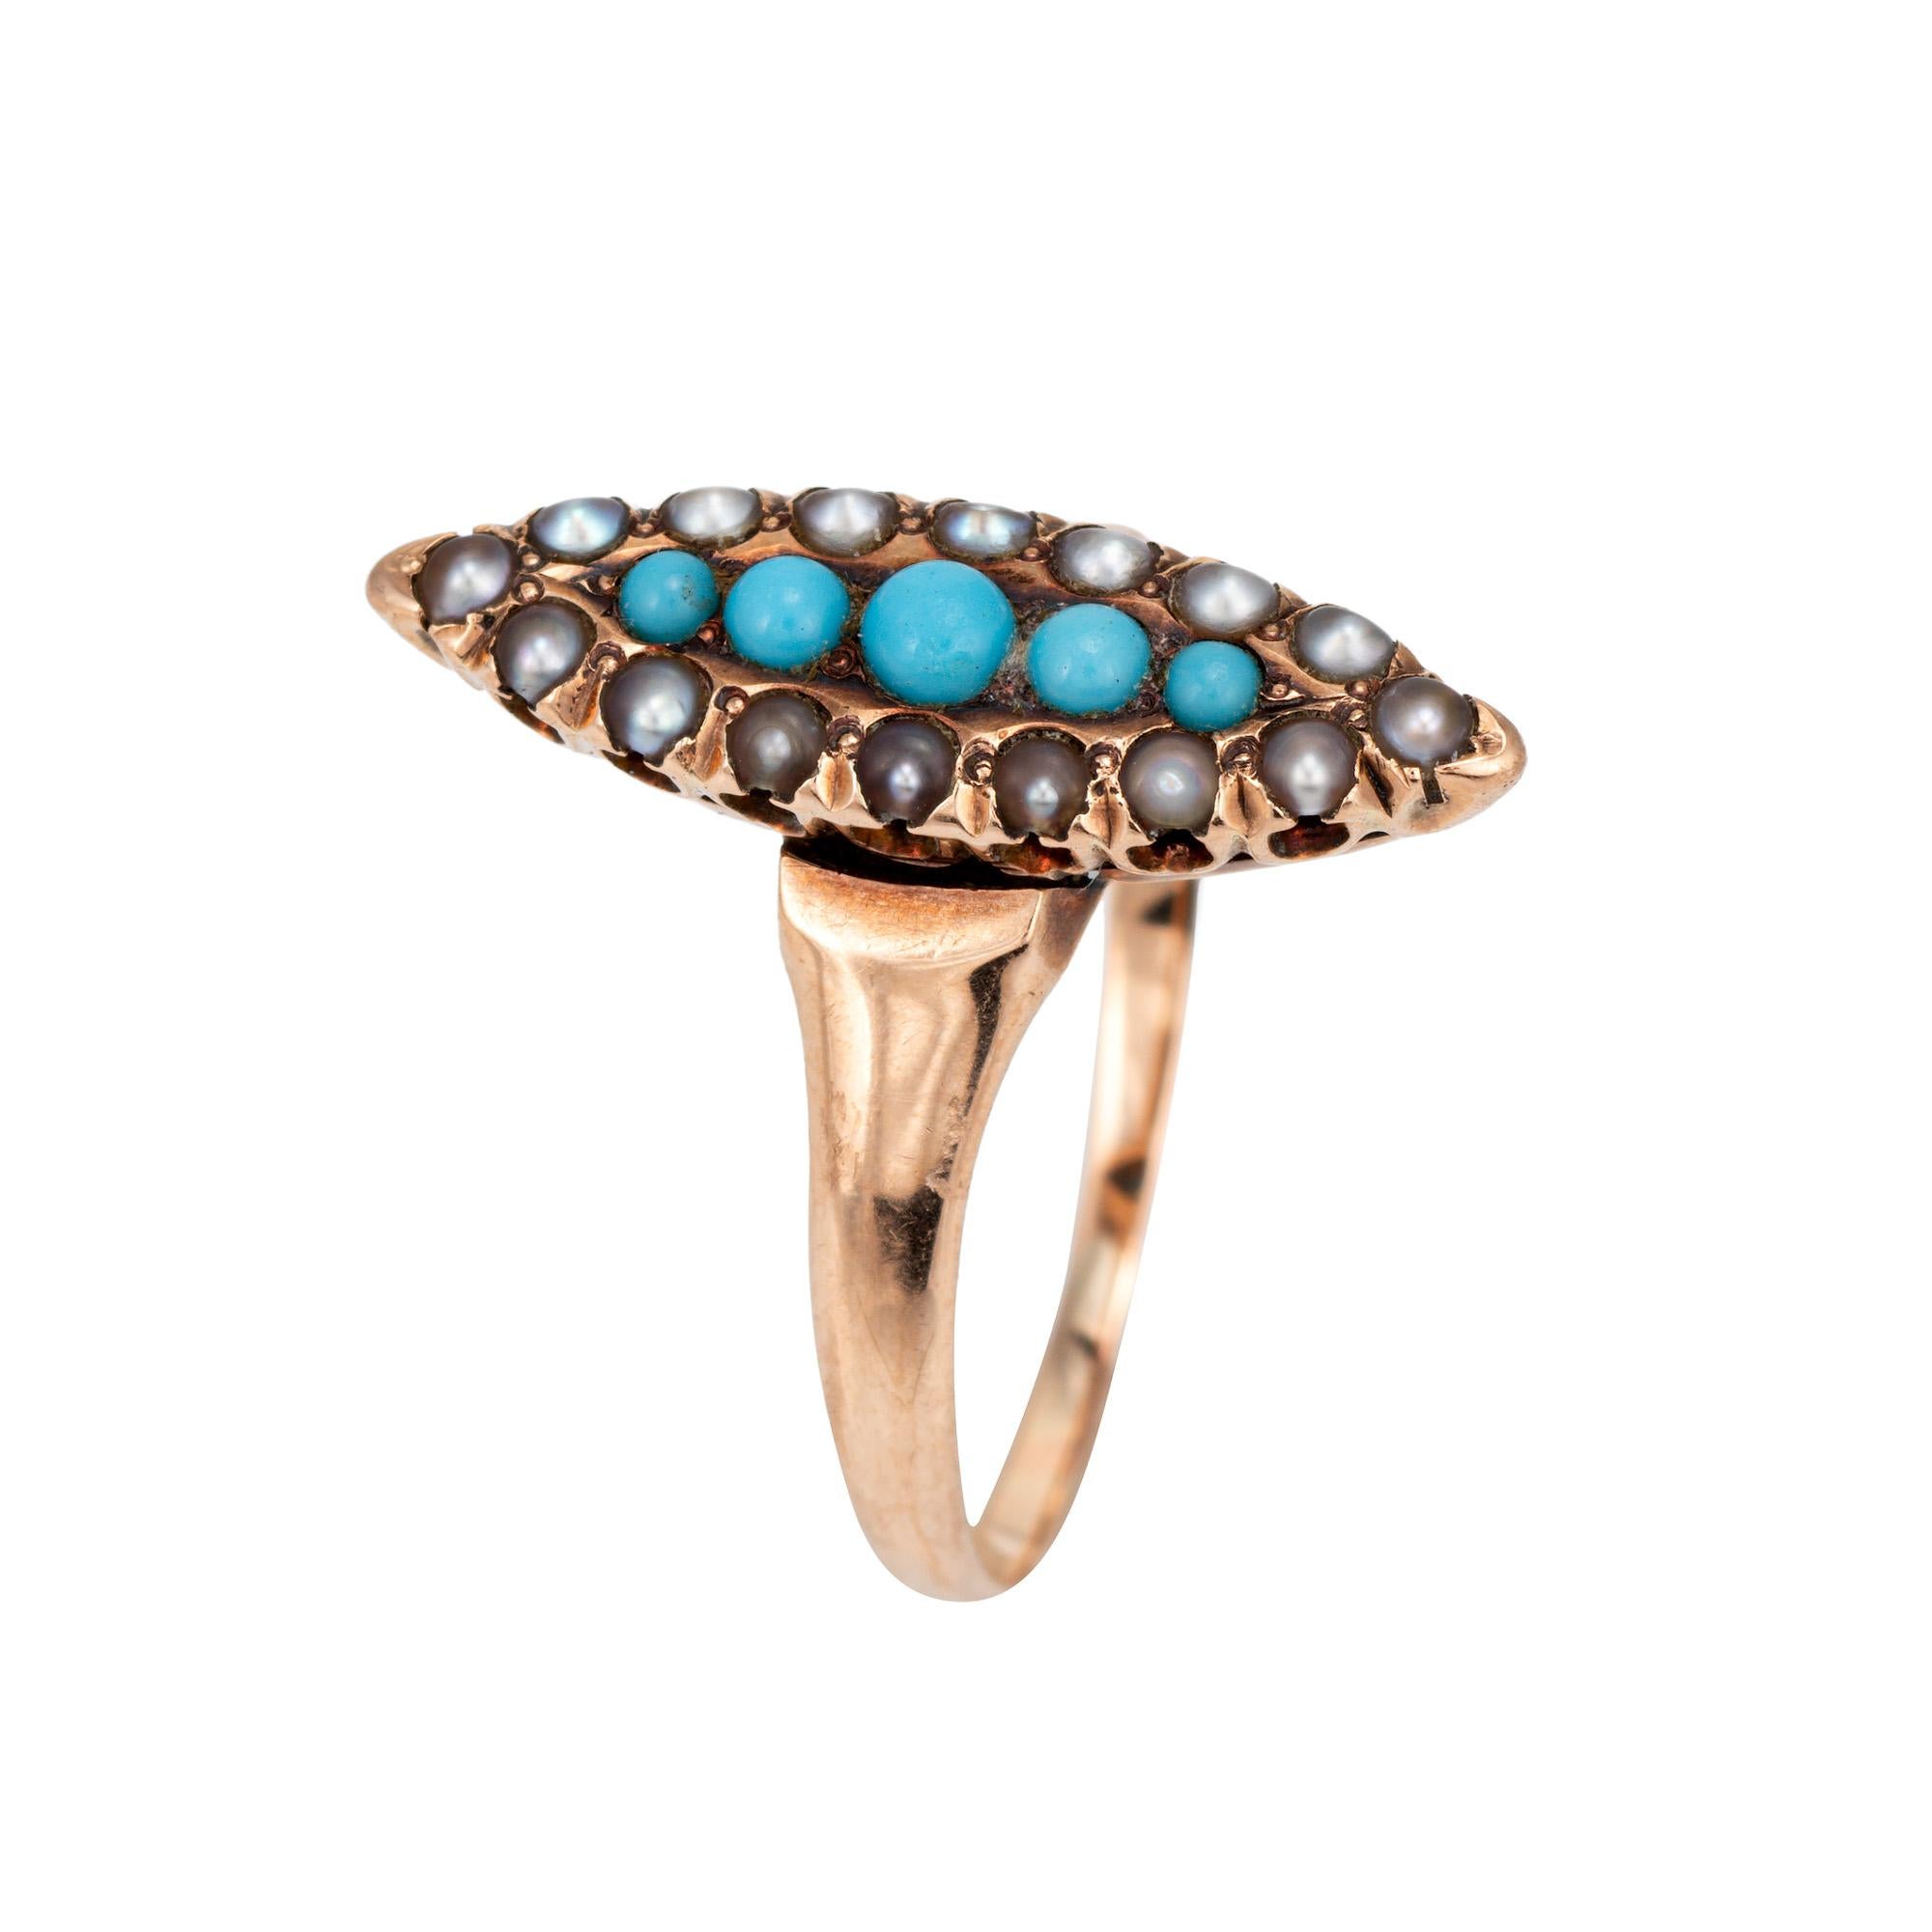 Stylish antique Victorian era navette ring (circa 1880s to 1900s), crafted in 10 karat yellow gold.

Cabochon cut turquoise measures from 1mm to 2mm. Small seed pearls accent the turquoise and measure approx. 1mm each. The turquoise is in very good